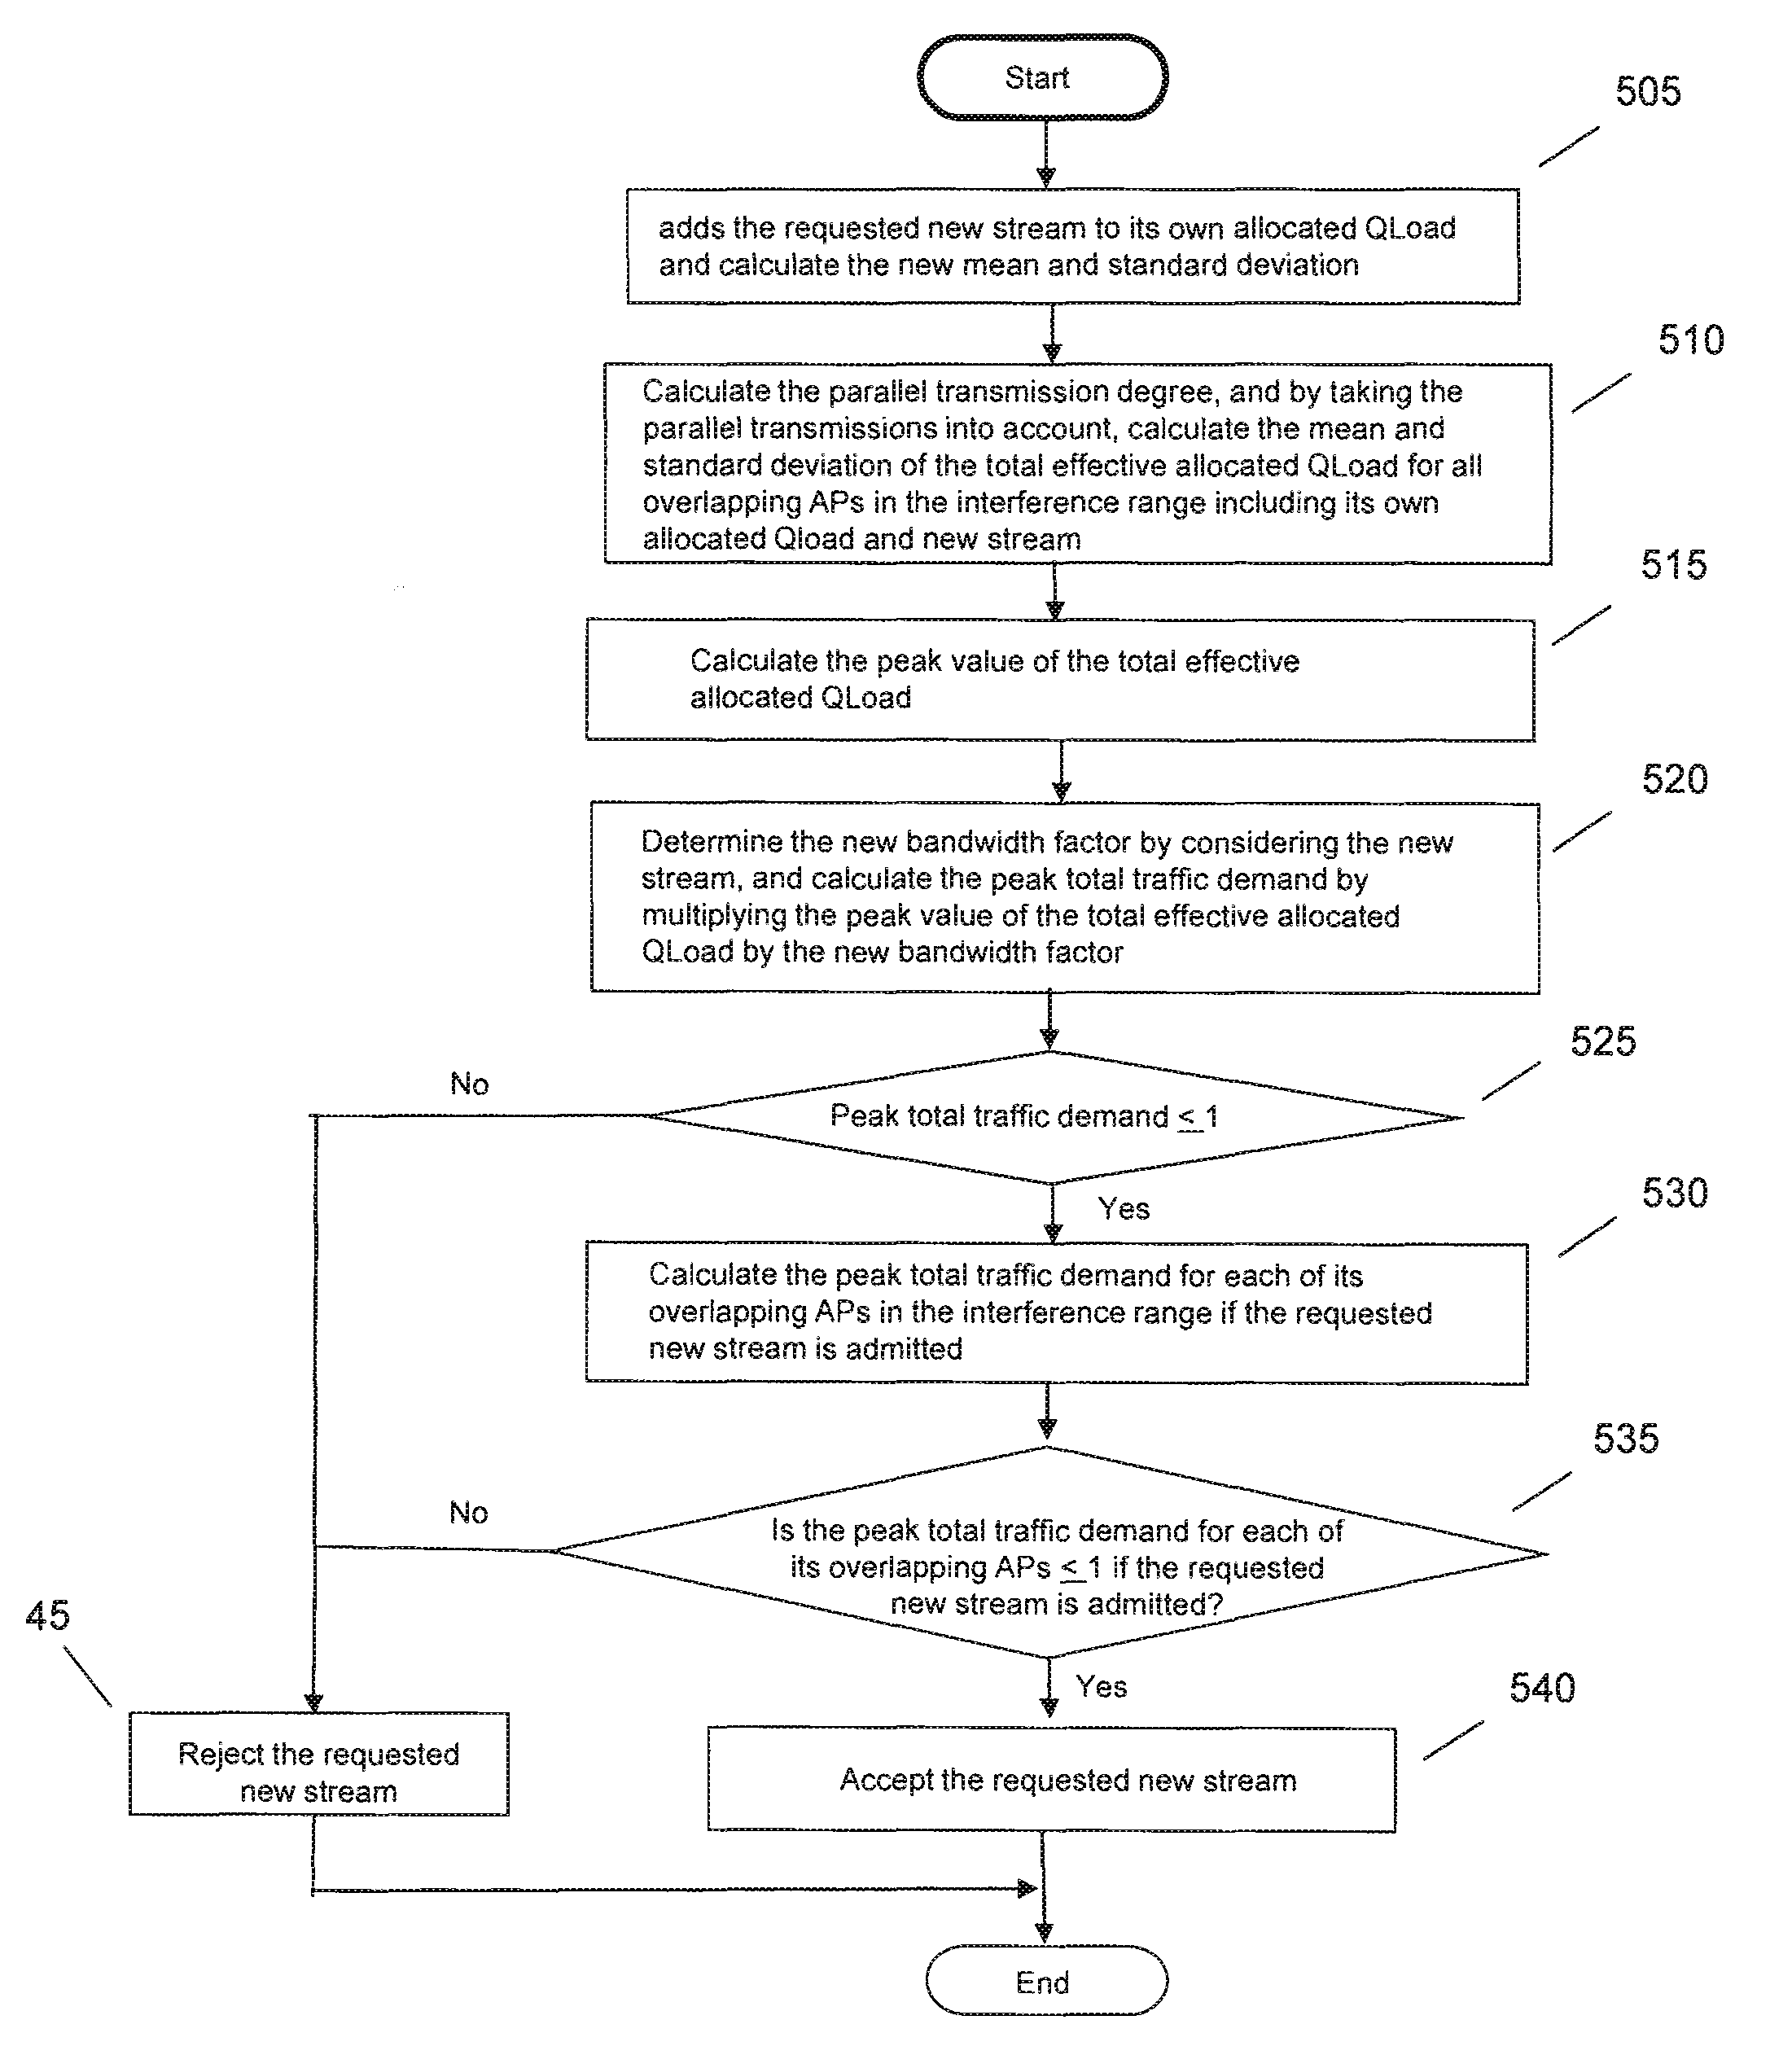 Method for adding a new quality of service traffic stream in a multiple wireless network environment